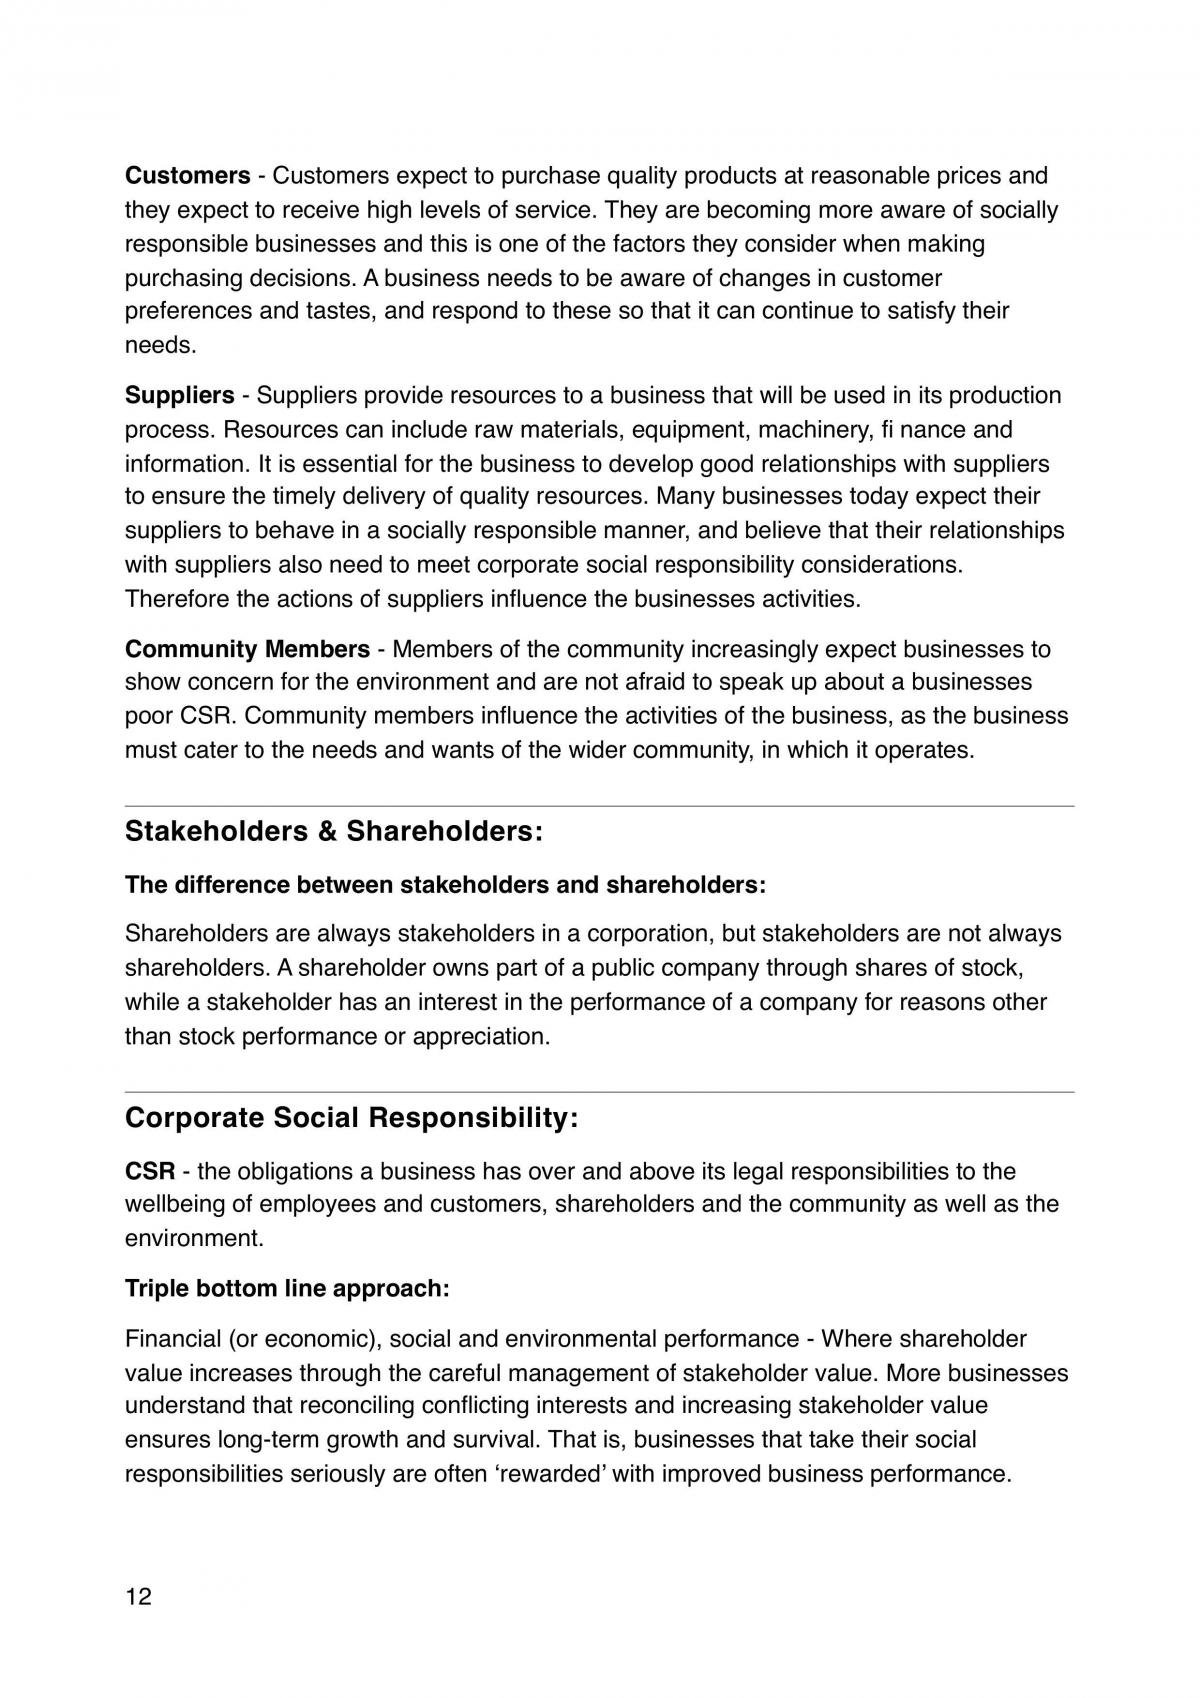 BUS1BFX Business Fundamentals Notes - Page 12